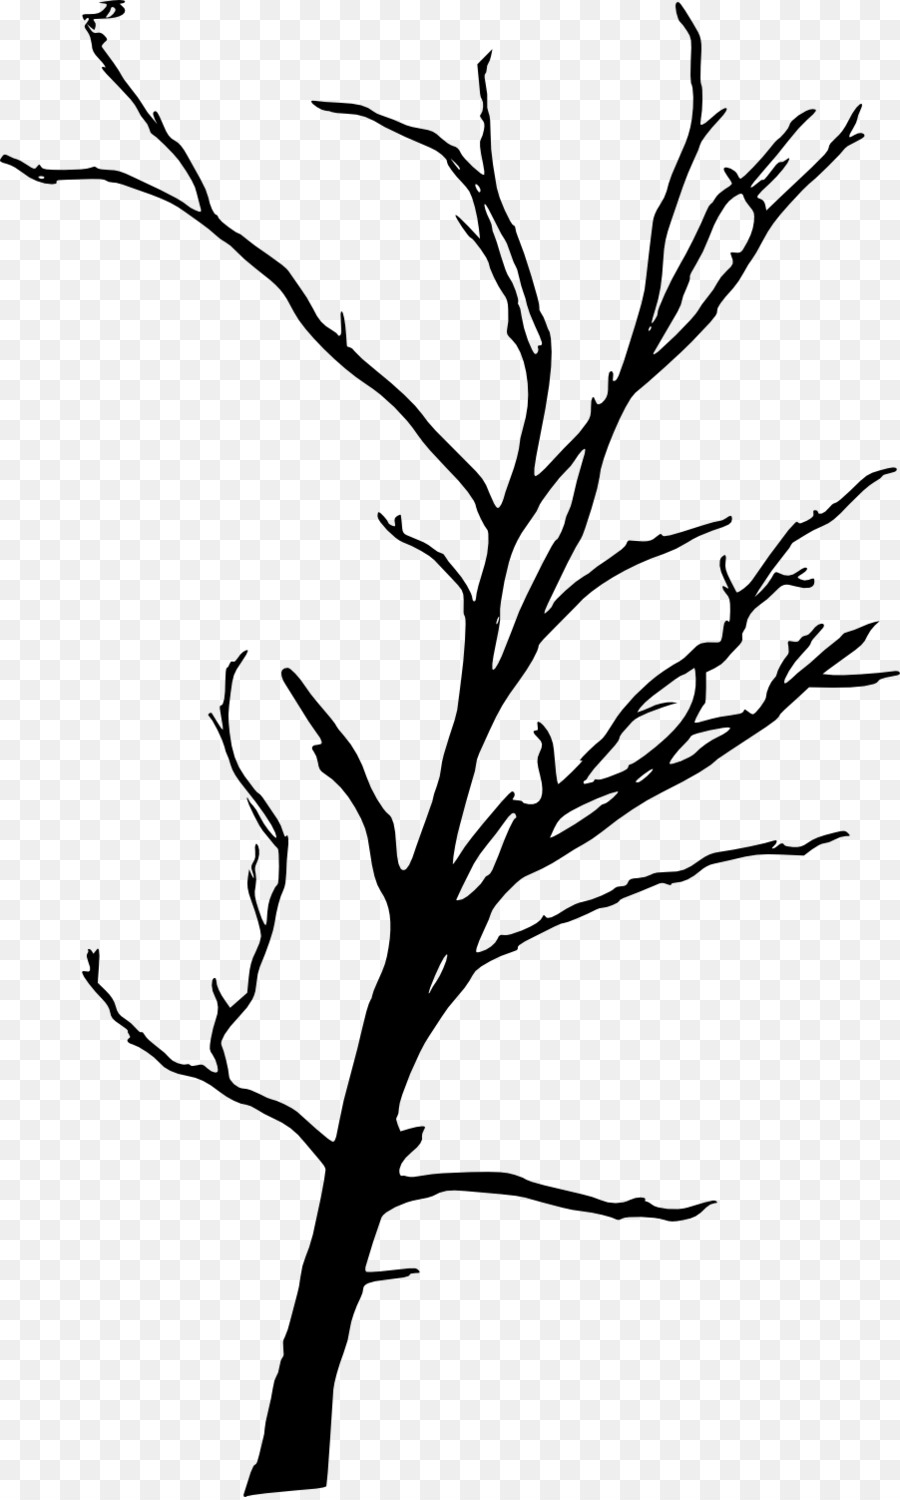 Tree Branch Woody plant Clip art - dead tree png download - 902*1500 - Free Transparent Tree png Download.